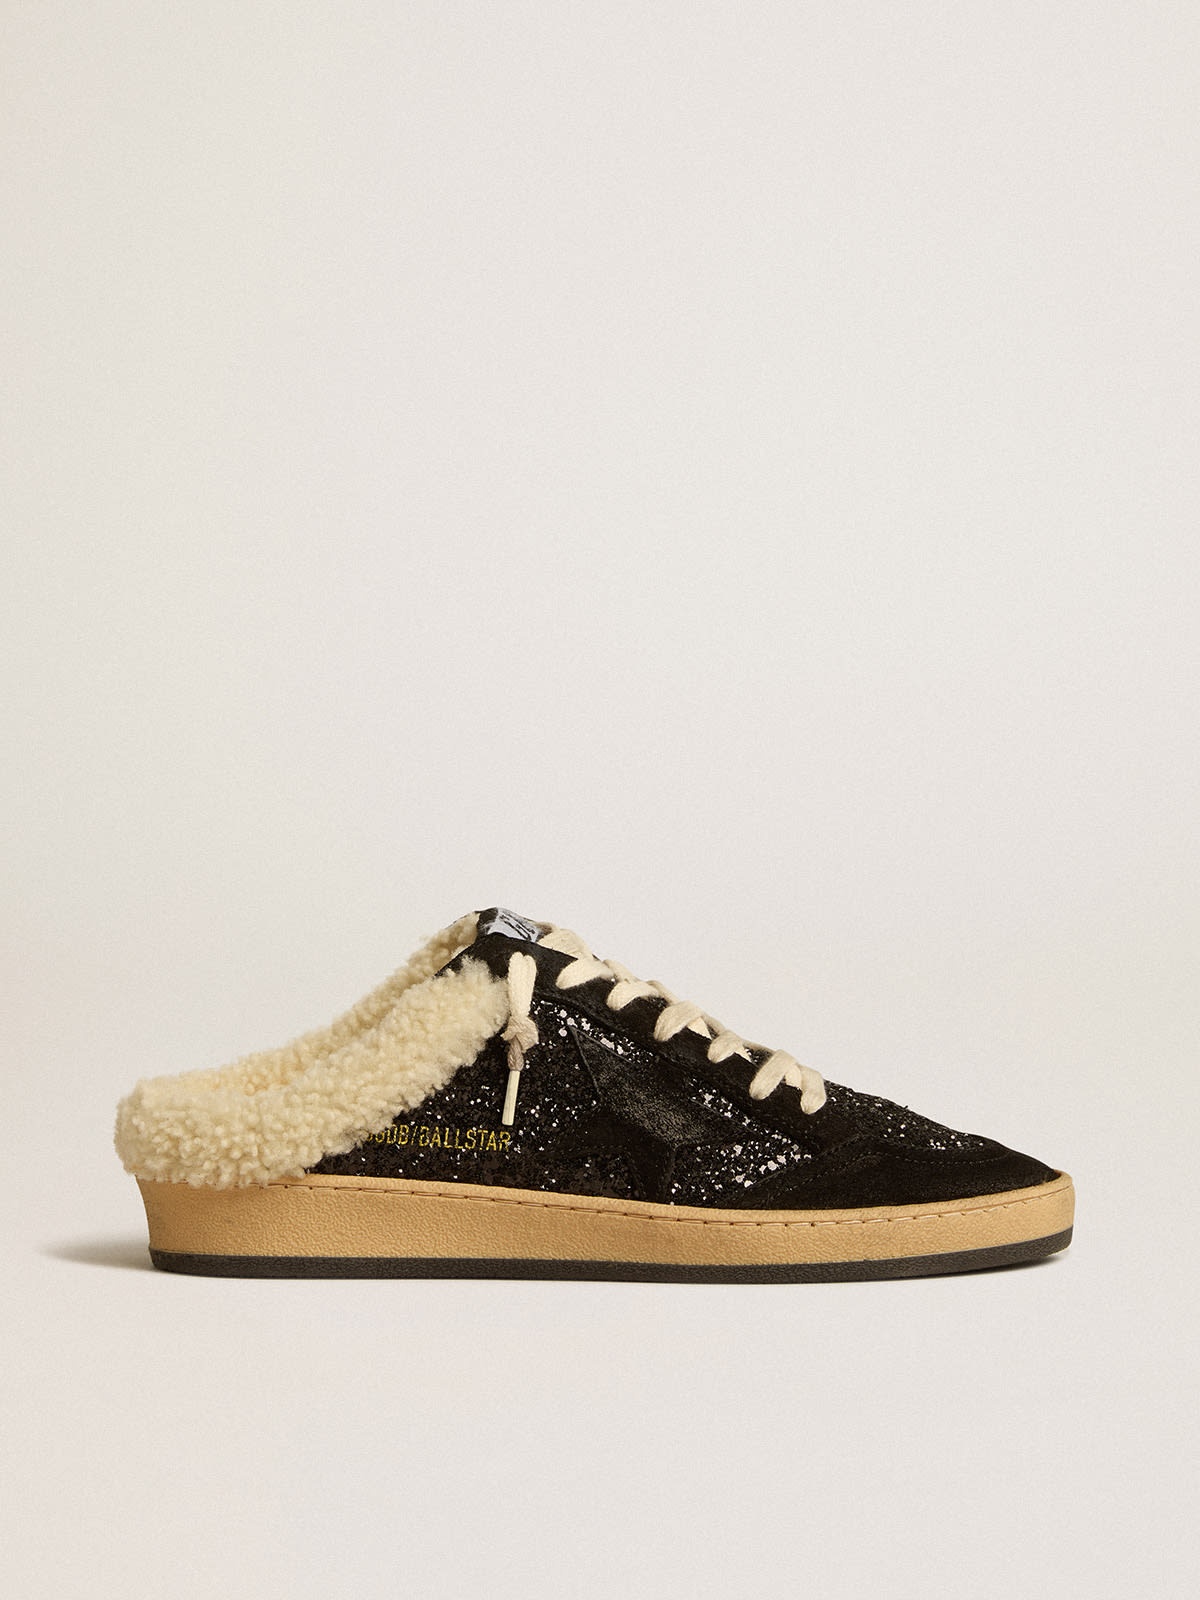 Golden Goose Ball Star Sabots in black glitter with black star and shearling  lining | REVERSIBLE